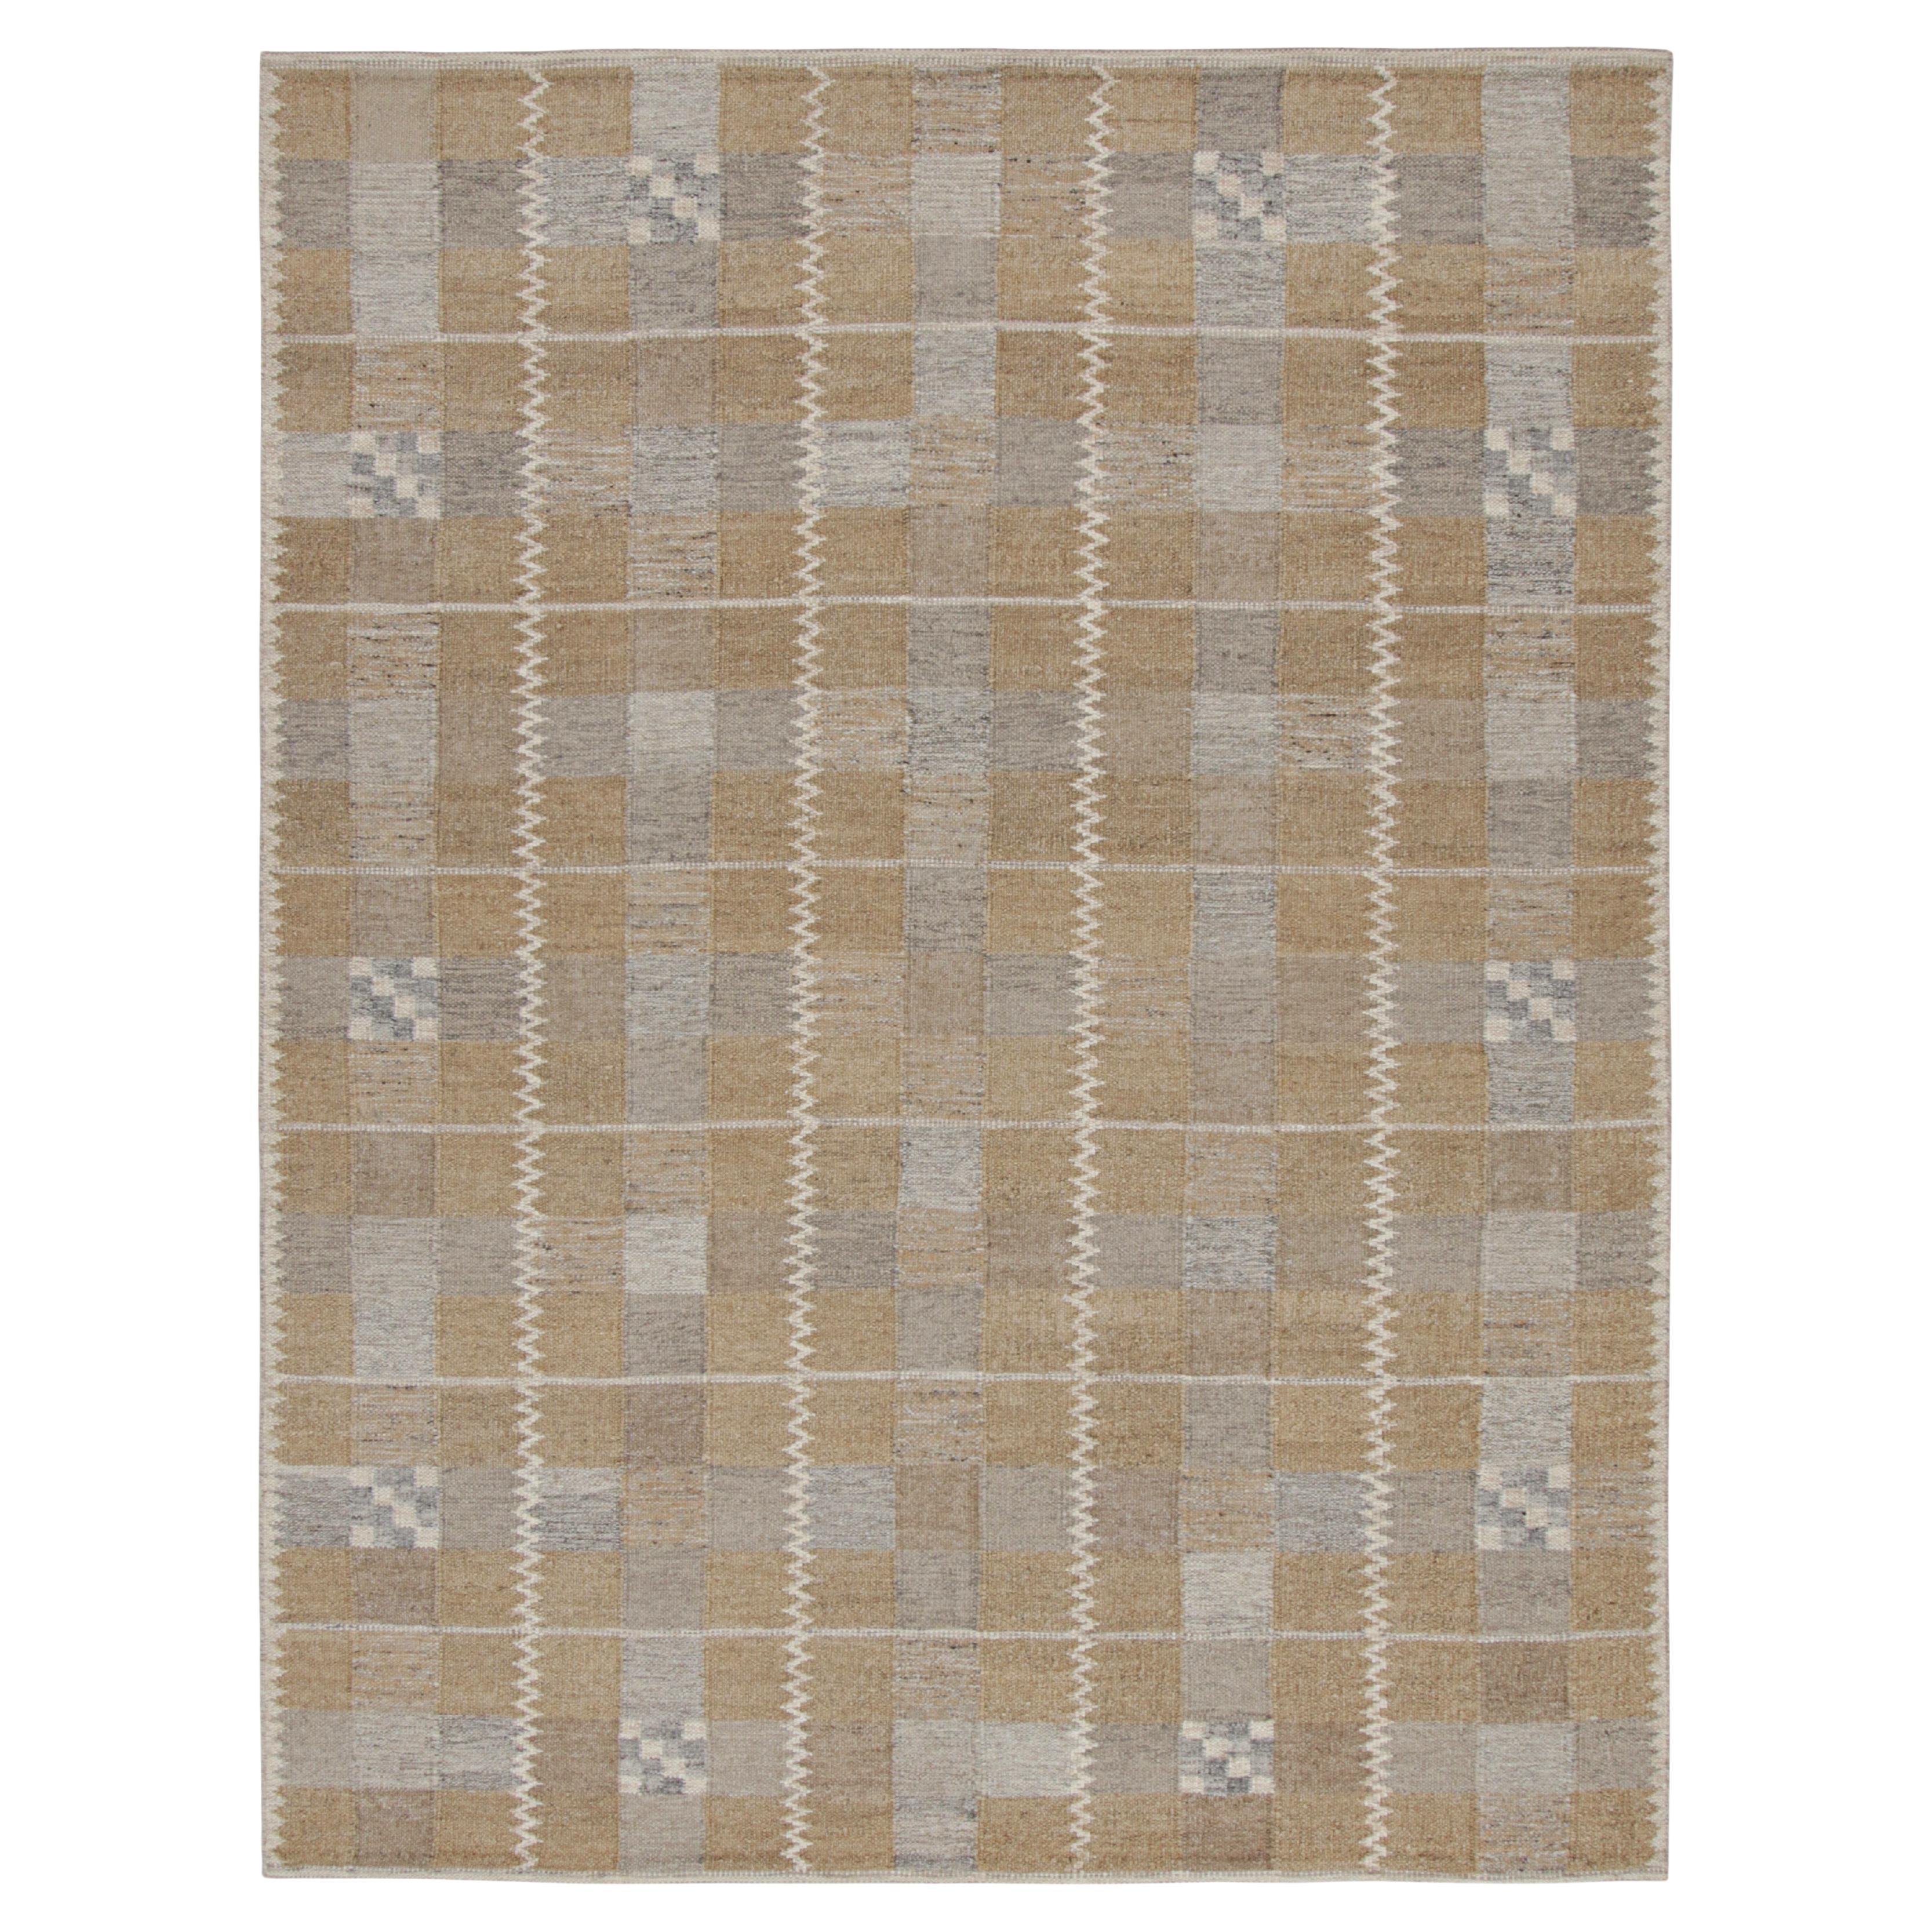 Rug & Kilim’s Scandinavian Style Rug with Brown and Gray Geometric Pattern